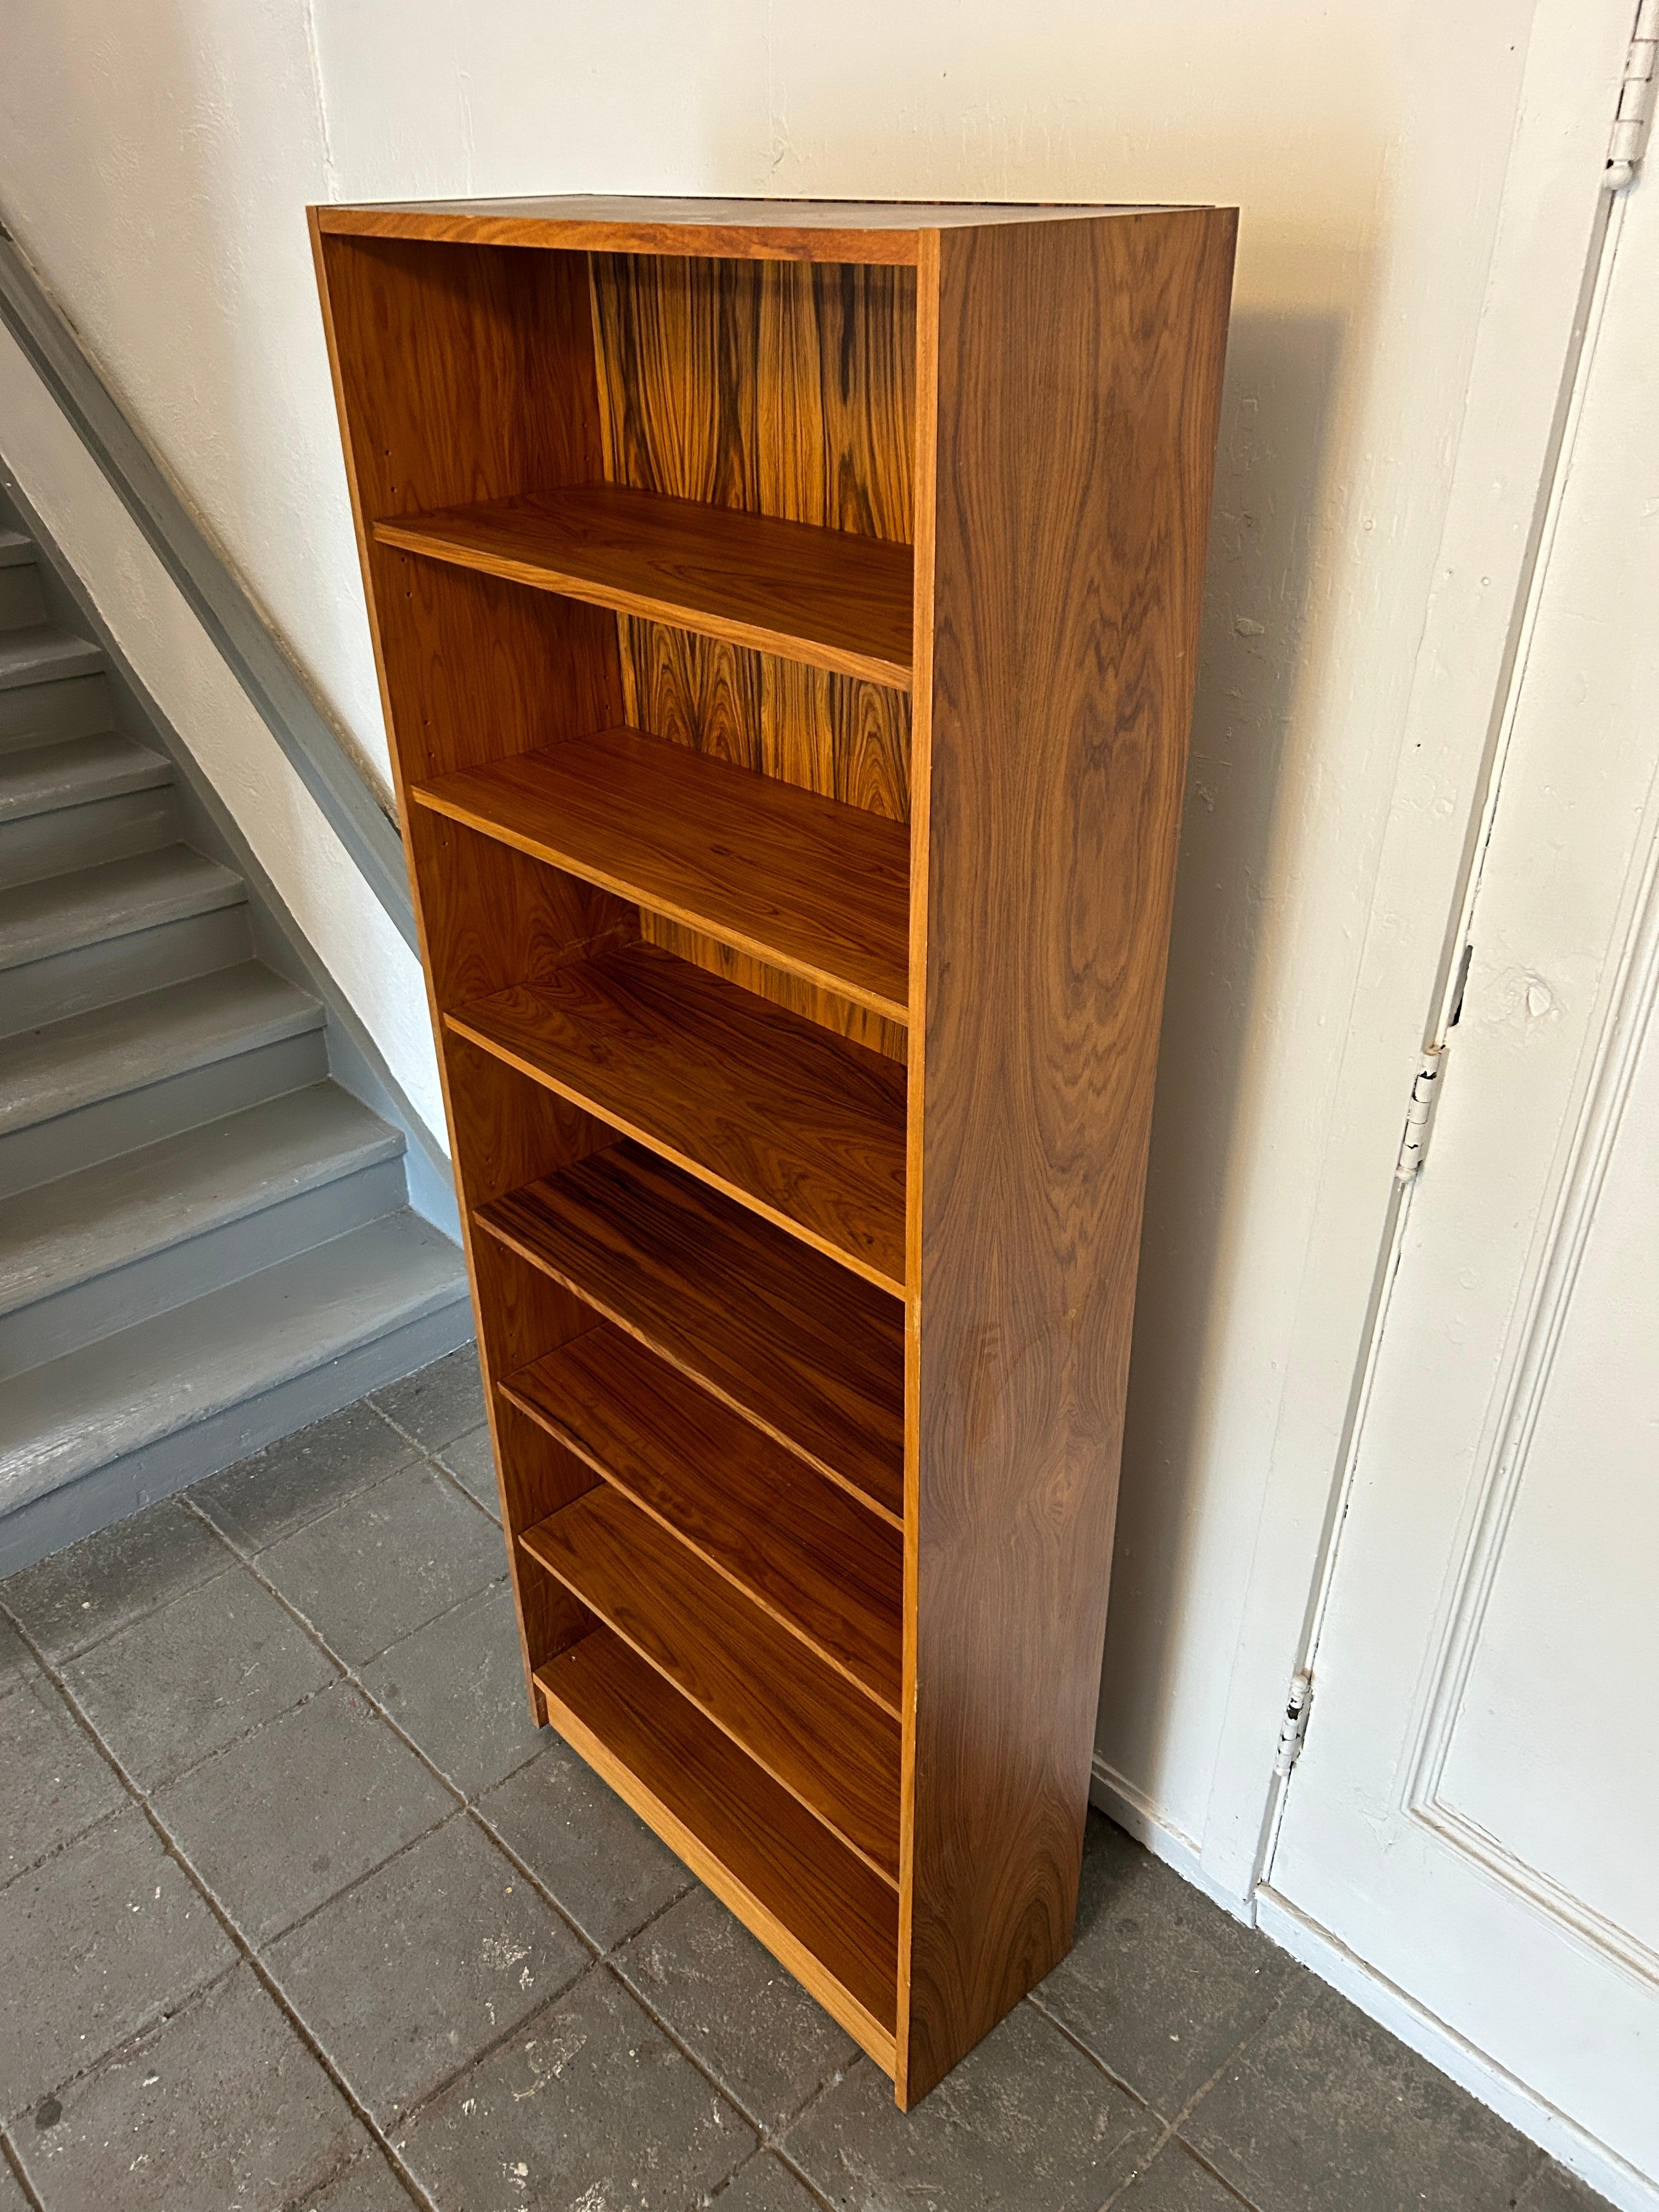 Stunning rosewood tall bookcase. This bookcase is completely original and in very good vintage condition. The bookcase has (5) adjustable shelves. Beautiful rosewood grain. The rosewood Grain is pretty amazing. by Gritsch Brazil. Labeled on